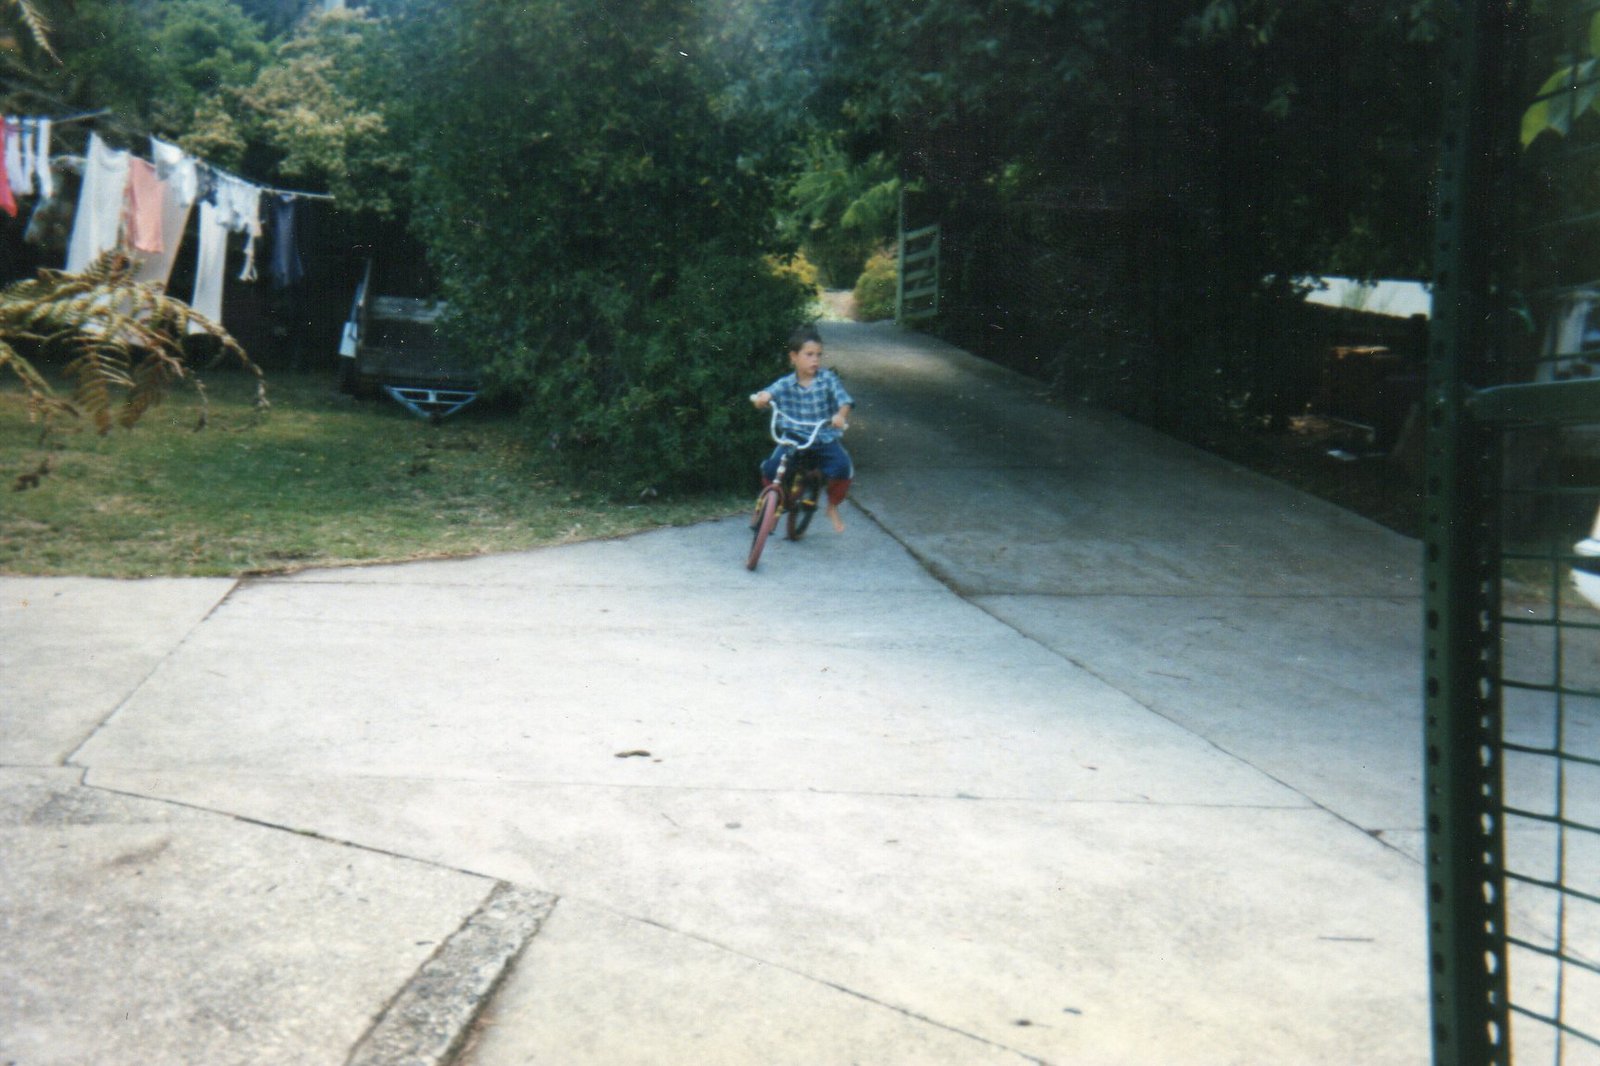 21 Dale Wright riding bike down driveway at Wright